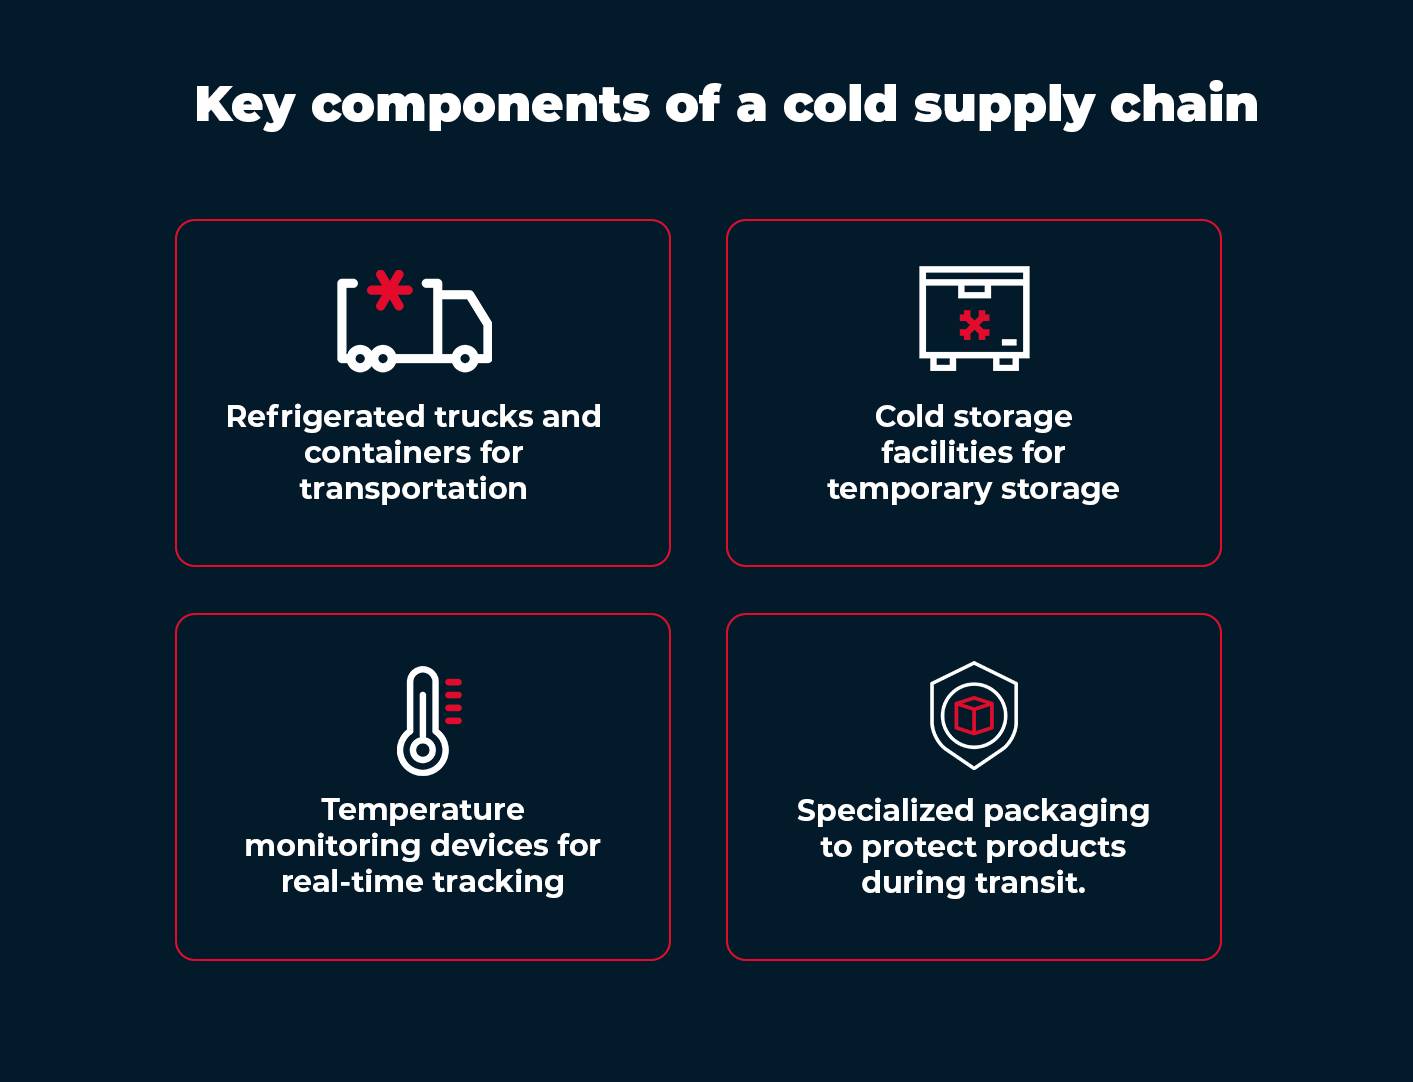 Key components of Cold Supply Chain